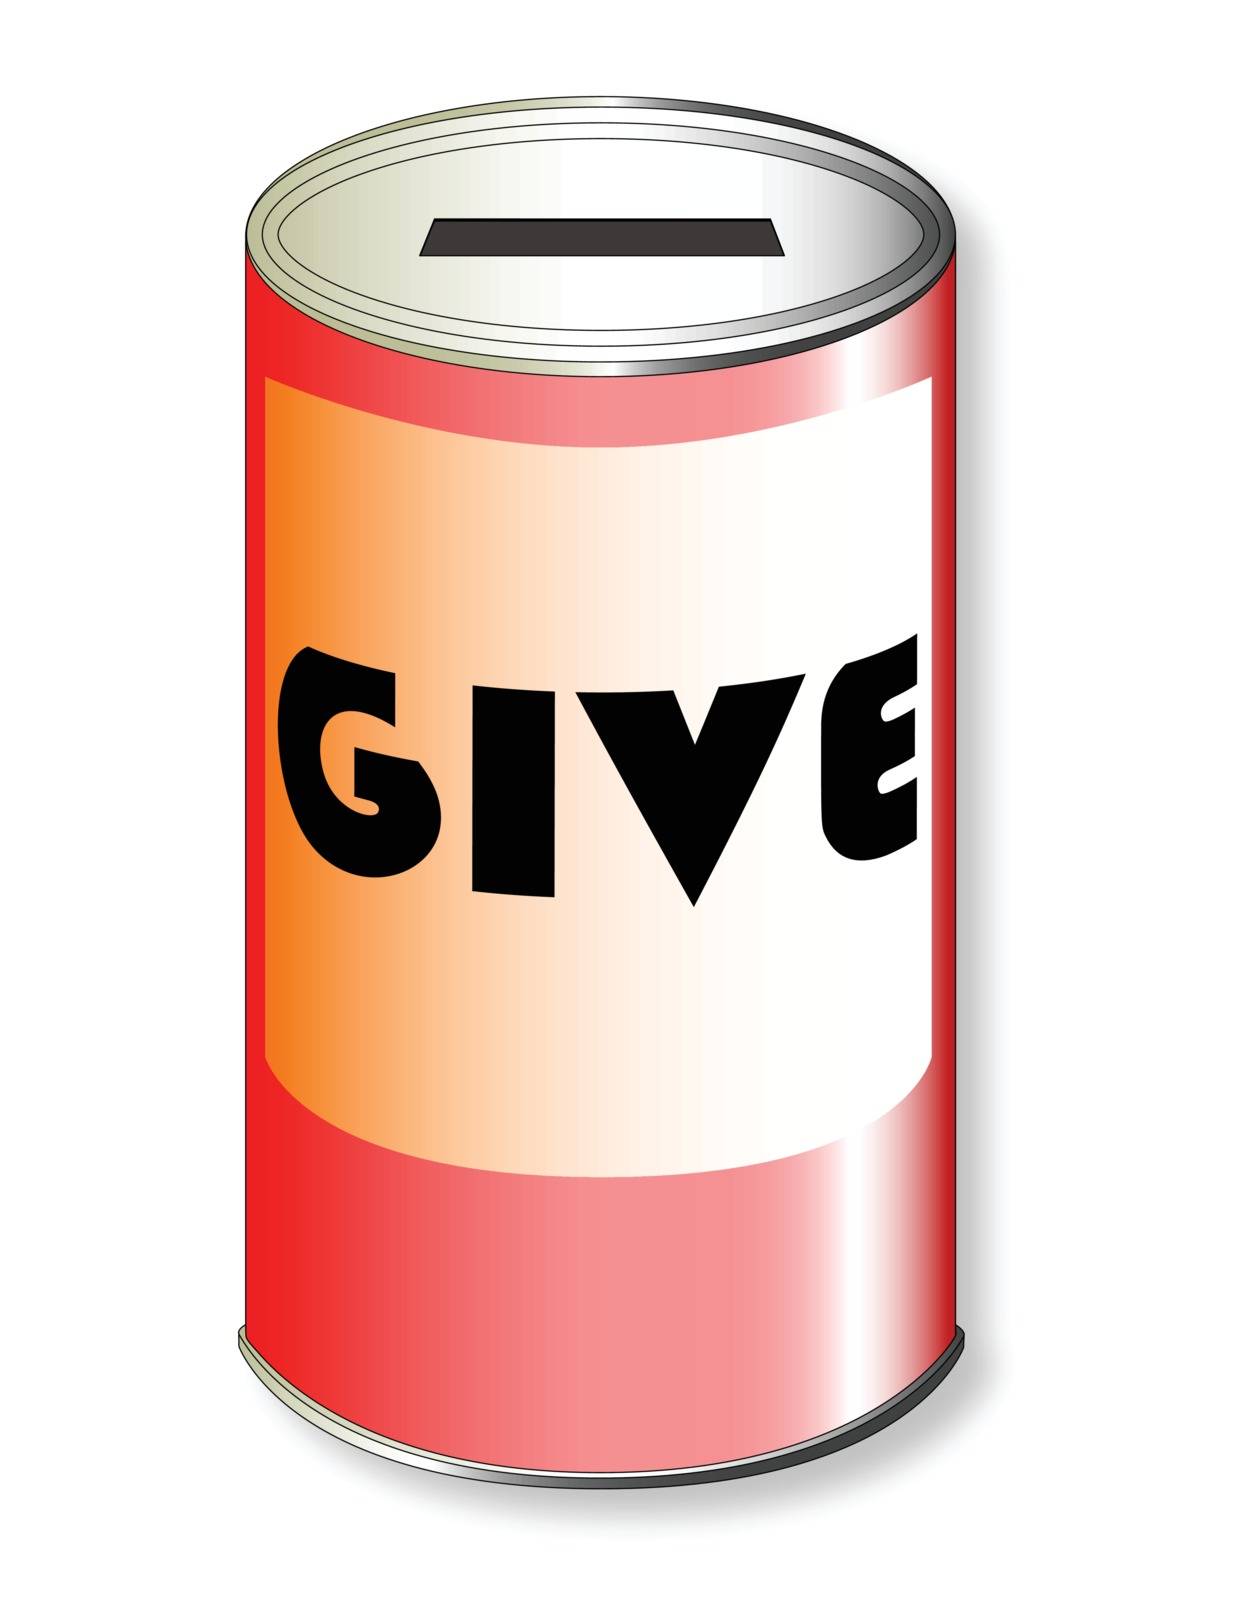 A red charity tin over a white background